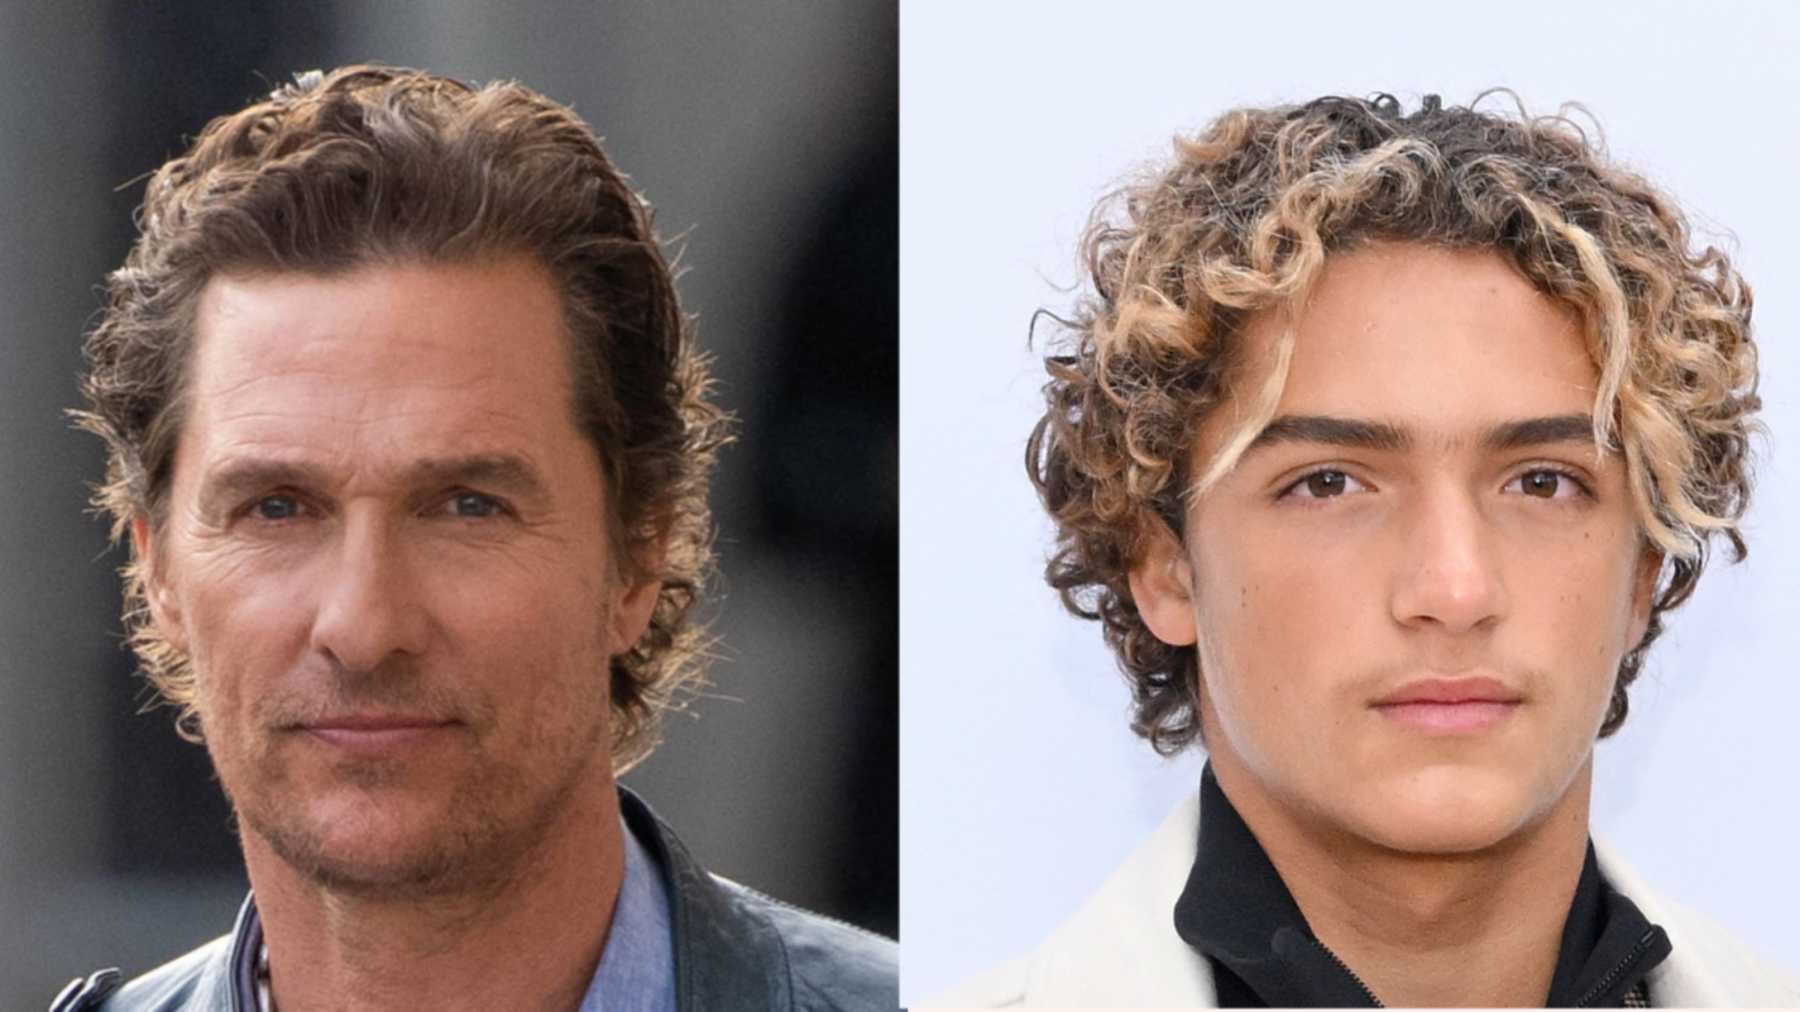 Matthew McConaughey Steps Out With His Oldest Son Who Looks Just Like ...